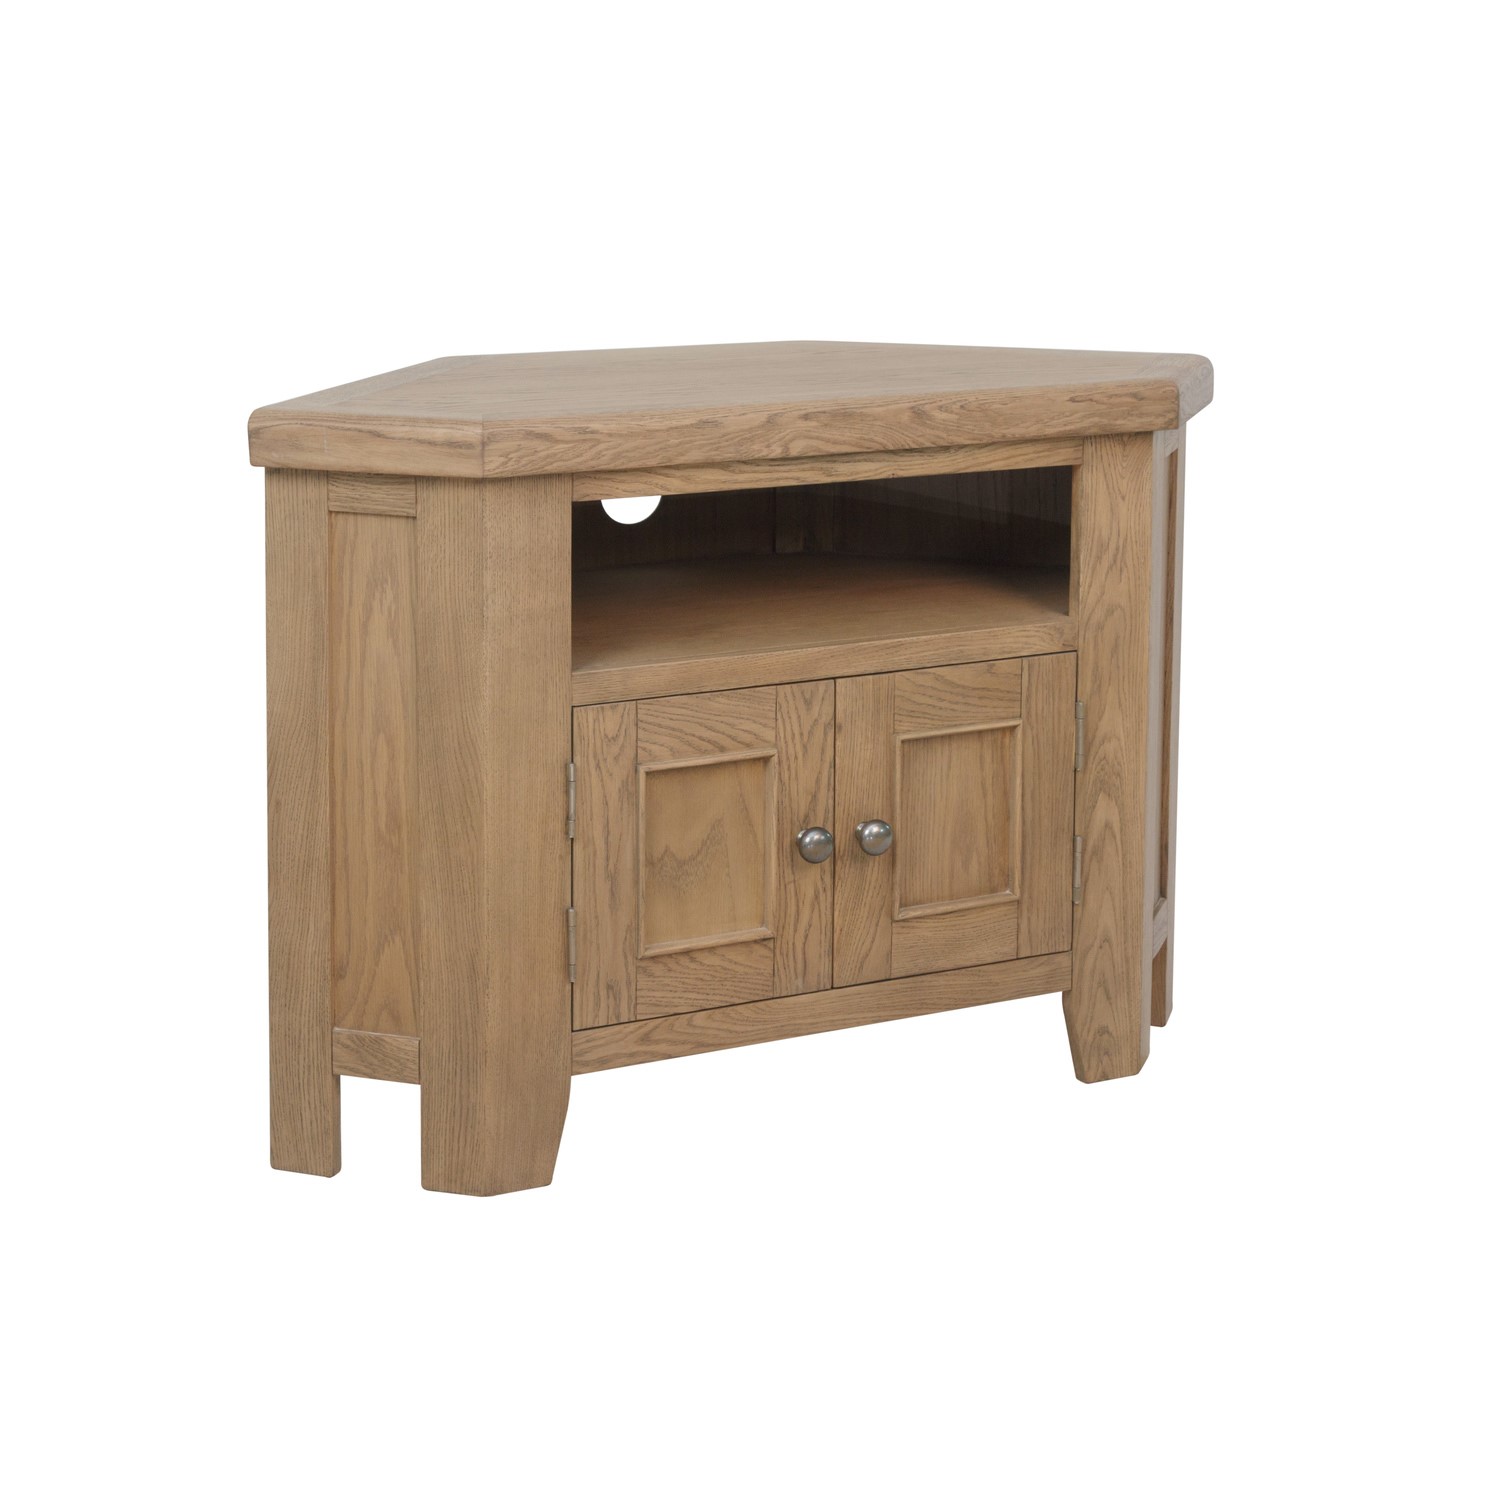 Photo of Solid oak corner tv stand with storage - pegasus